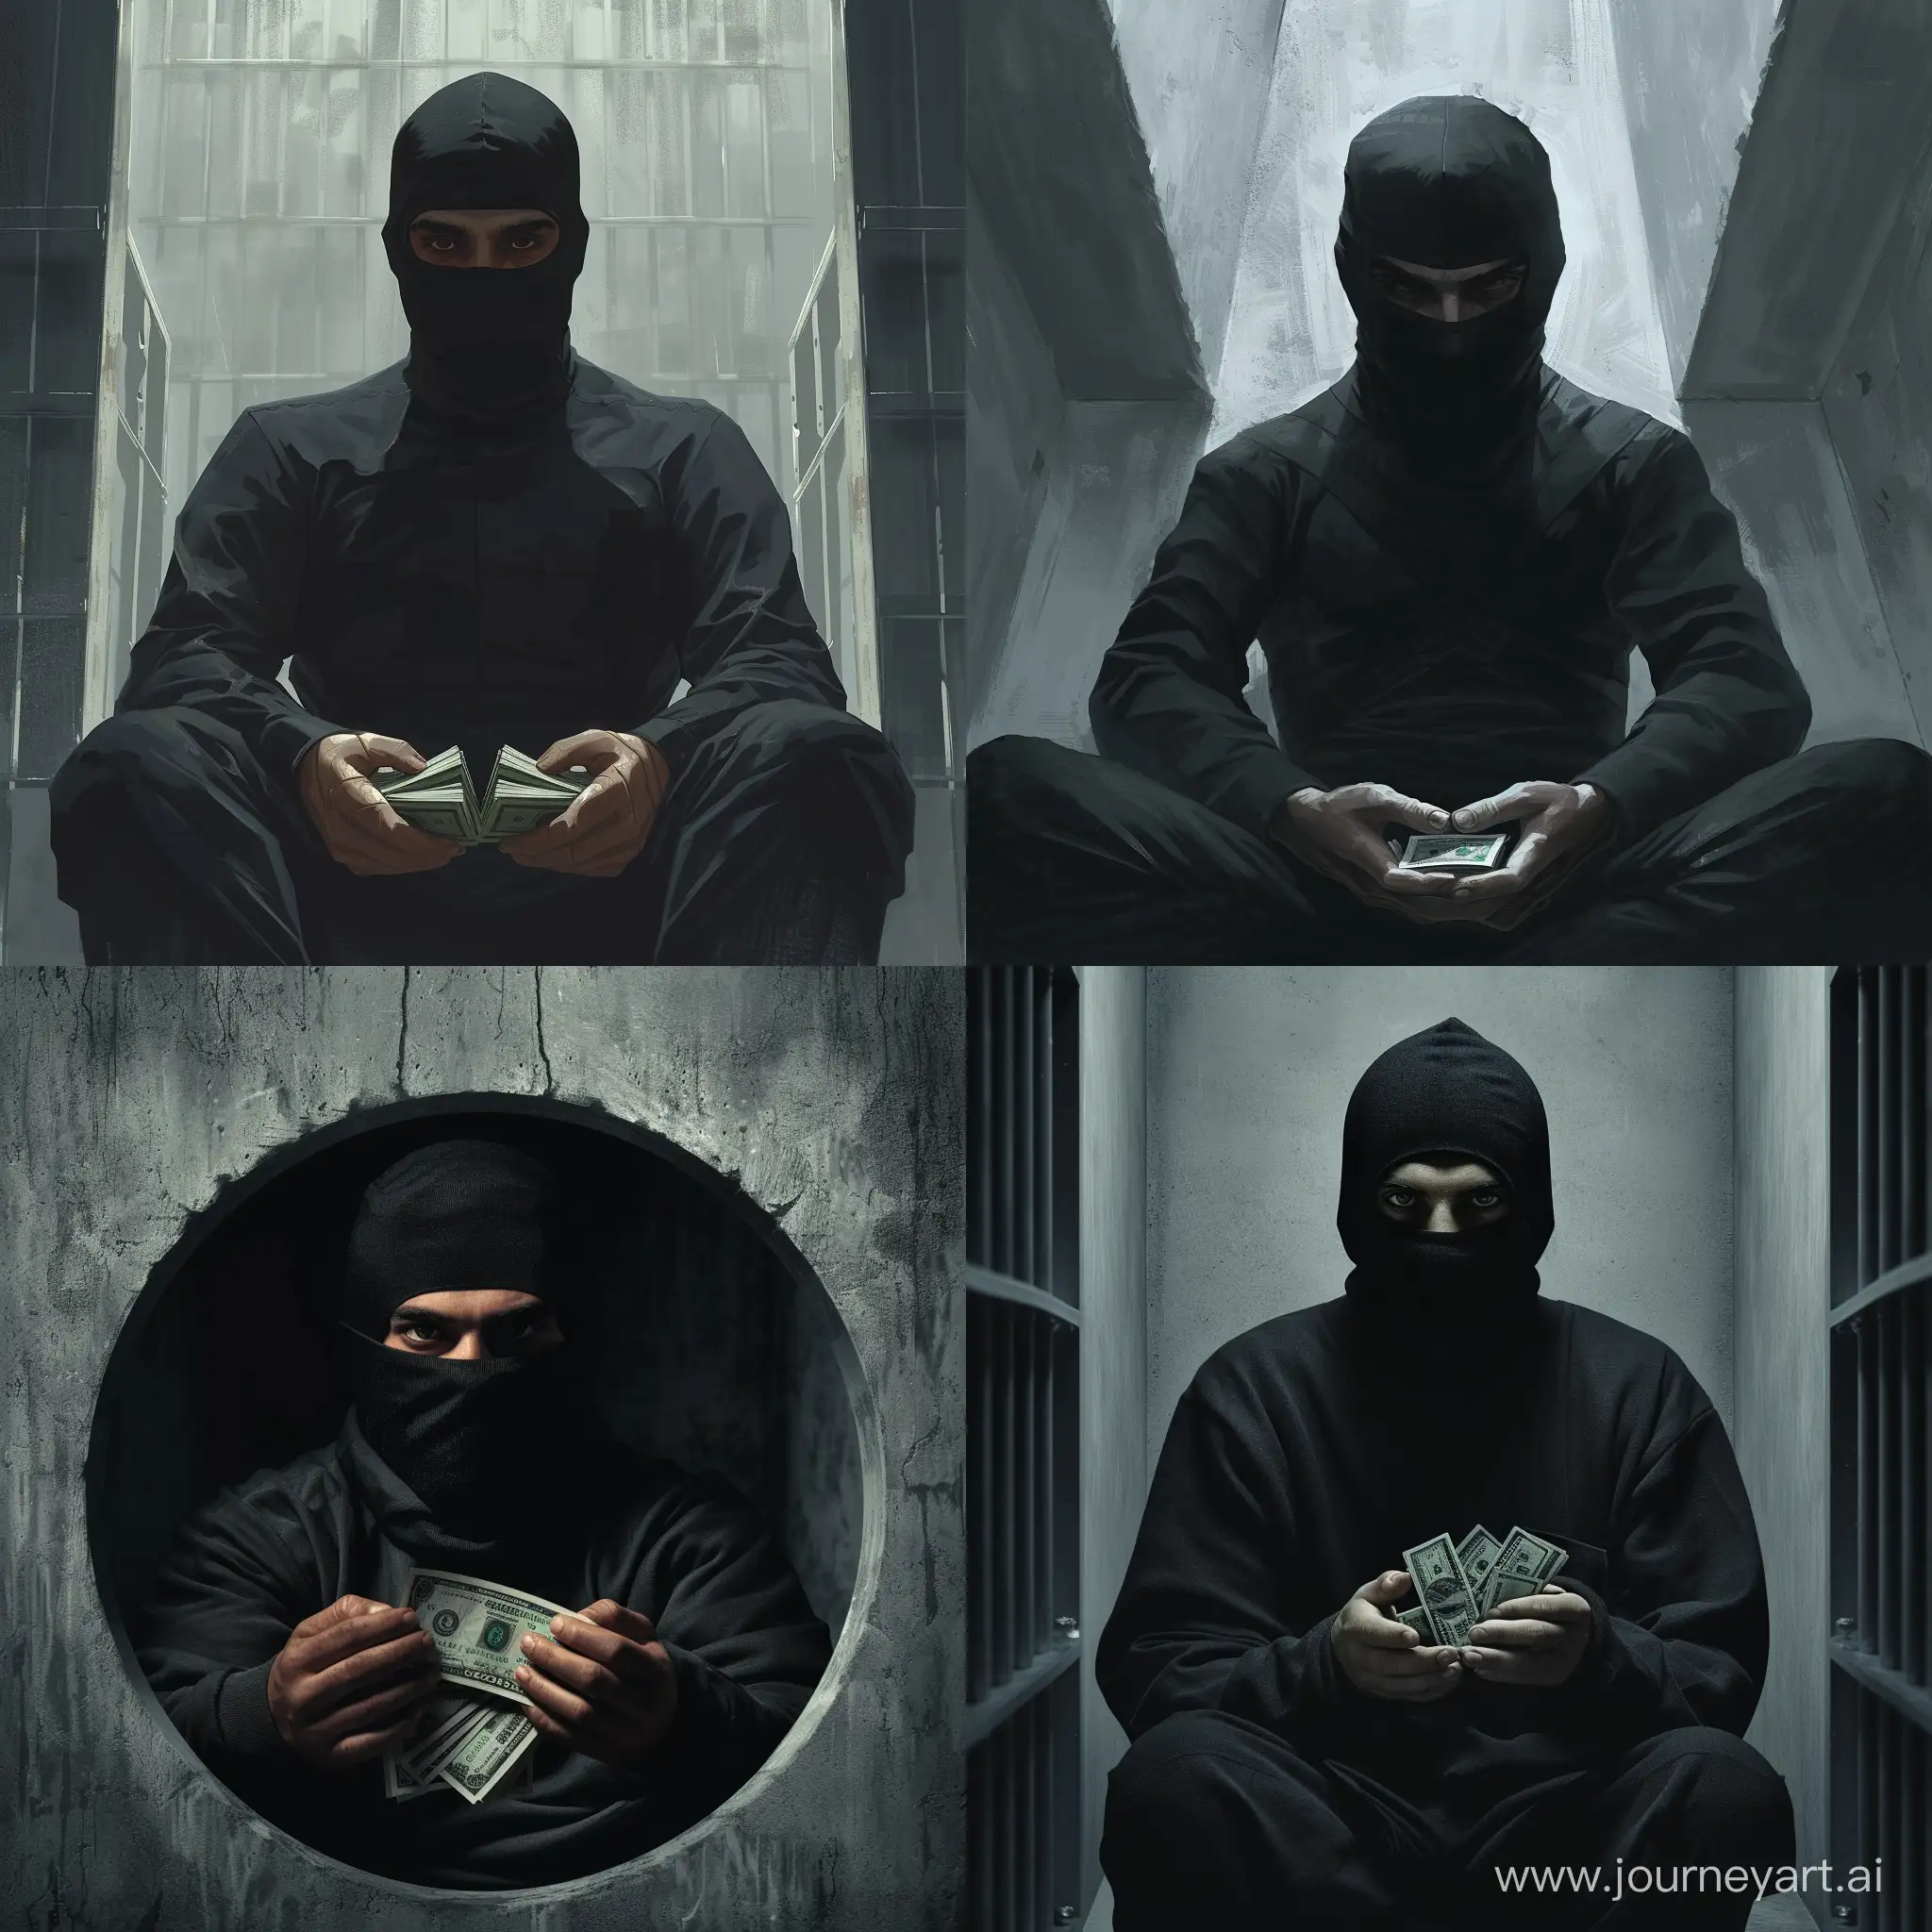 Mysterious-Bandit-Counting-Stolen-Cash-in-a-Stark-Prison-Cell